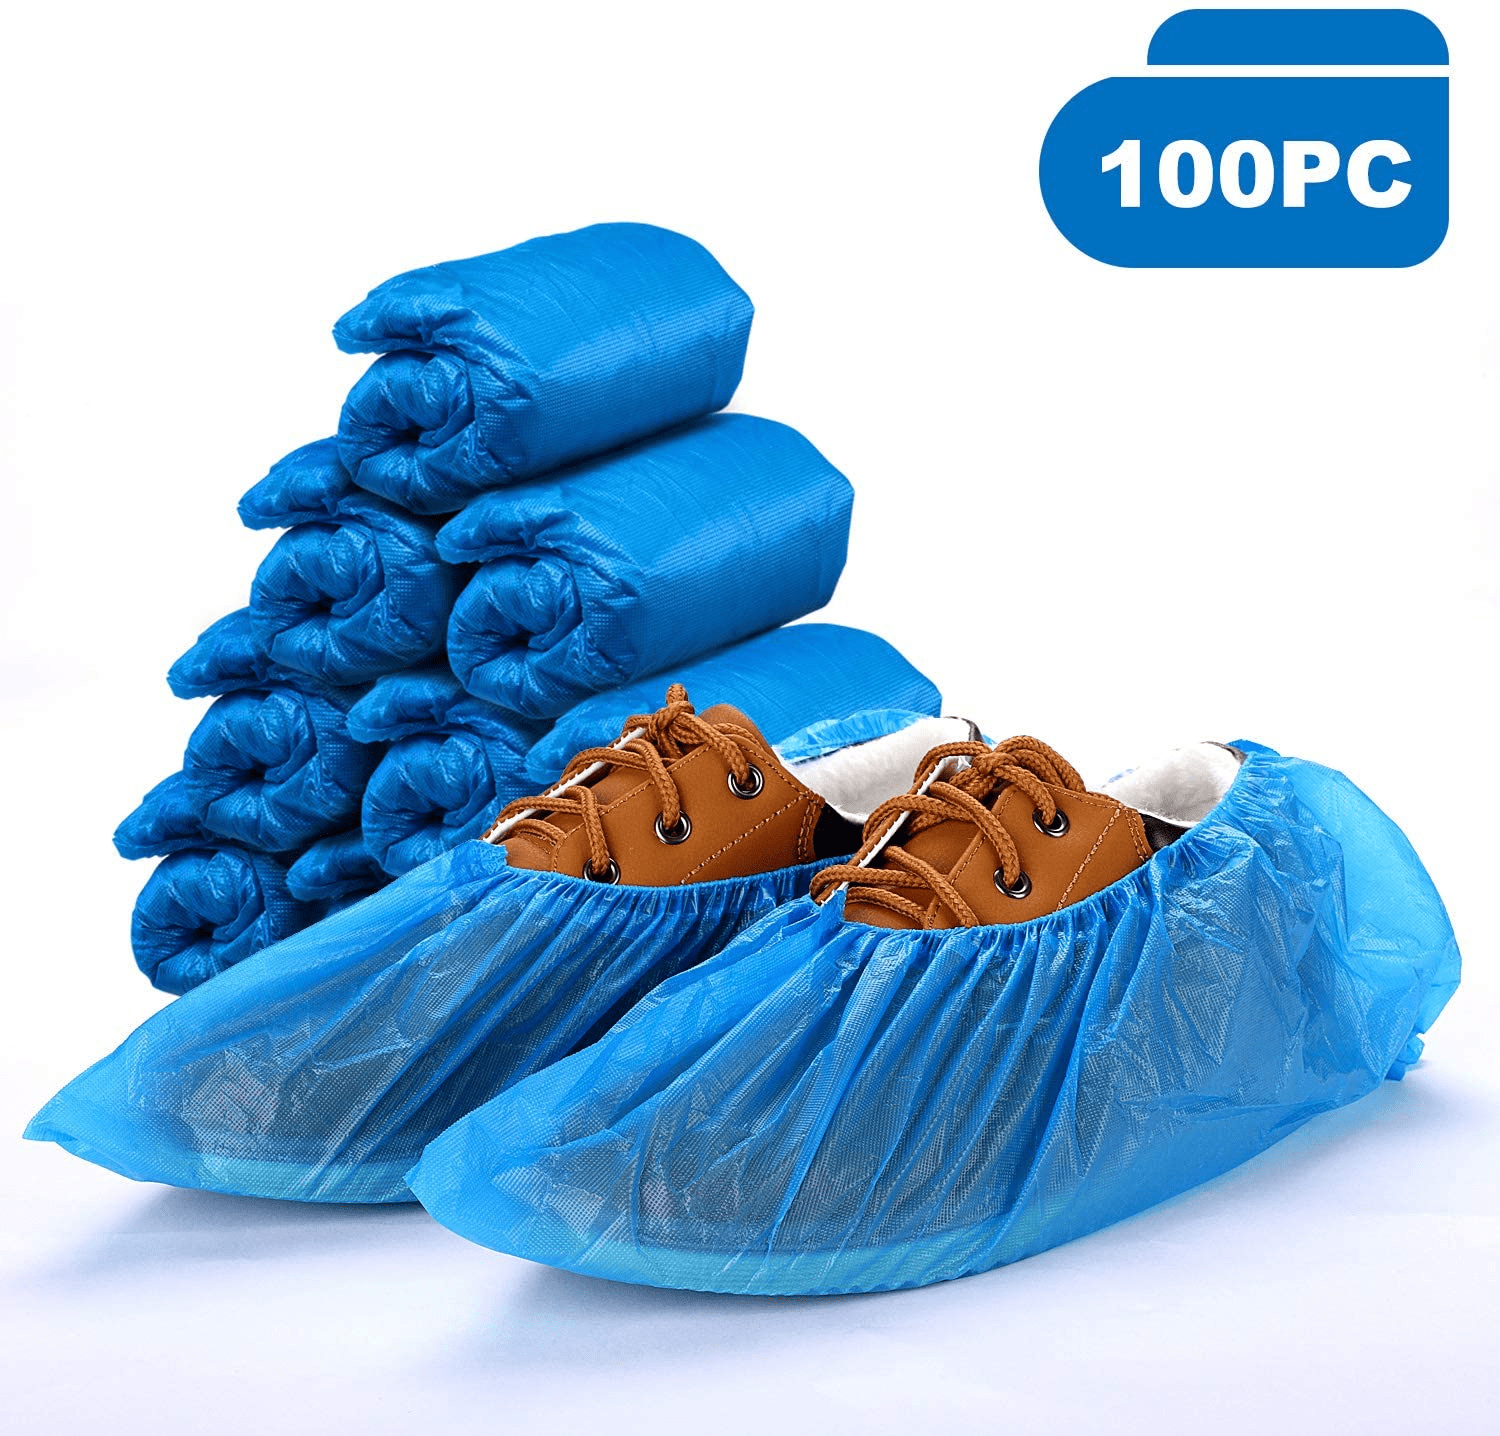 50 PCS Disposable Overshoes Non-woven Shoe Covers Blue Shoe Protector Covers for Shoes and Boots to Protect Carpets & Floors Cleaning Accessories for Home Lab Museum 